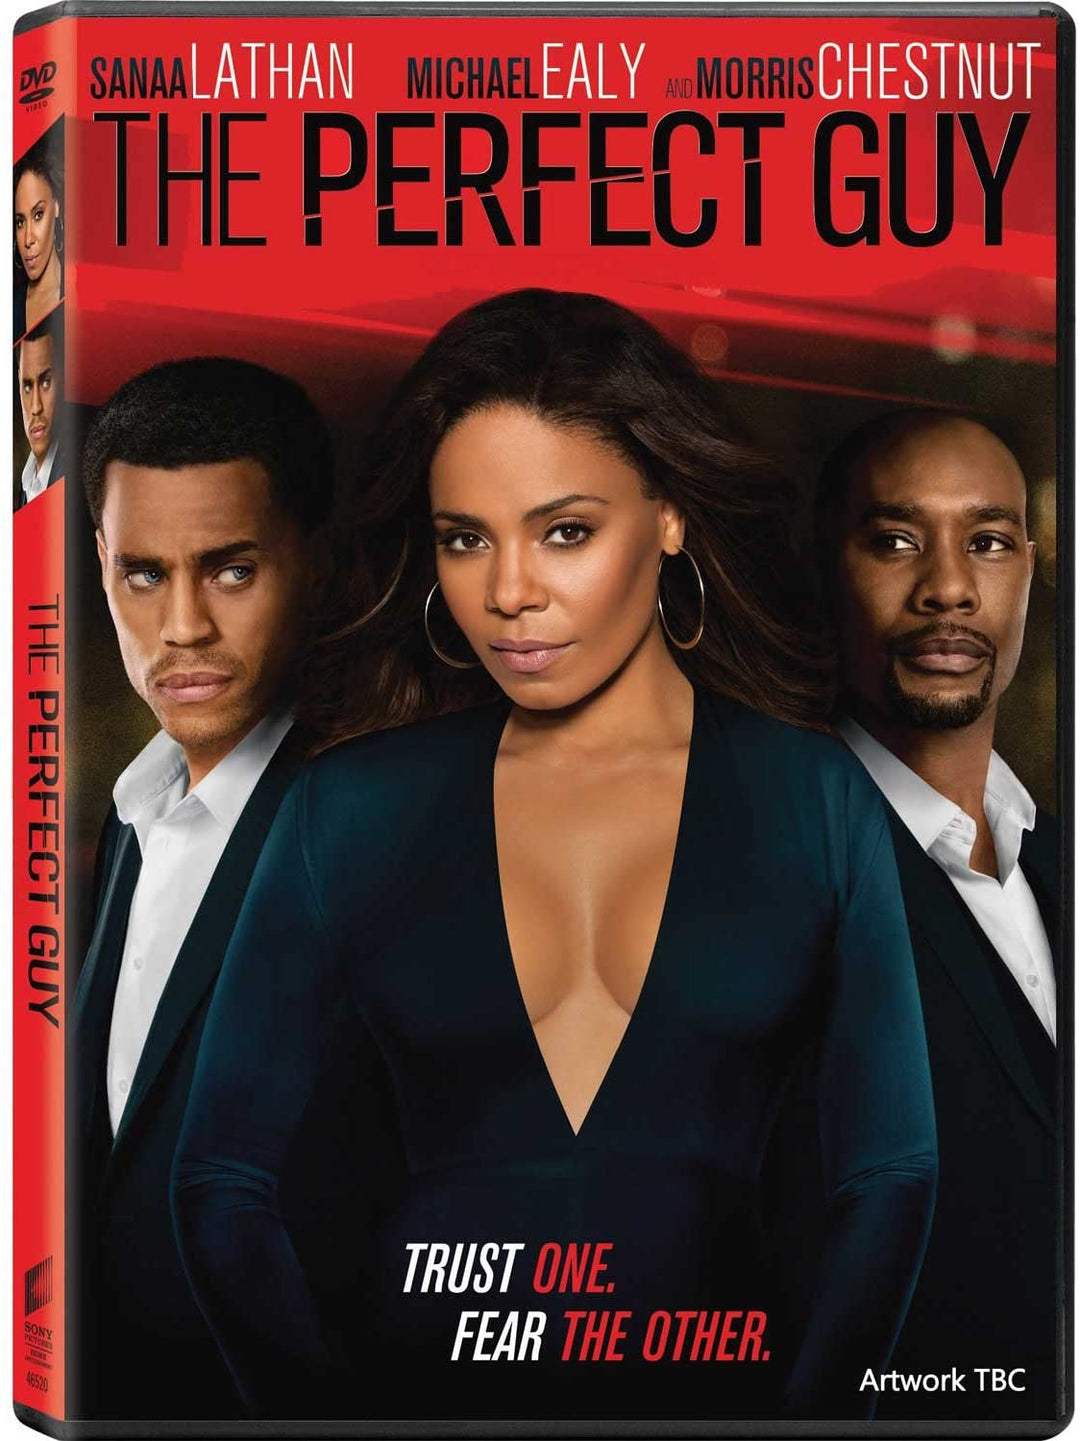 The Perfect Guy [2015] - Thriller/Drama [DVD]